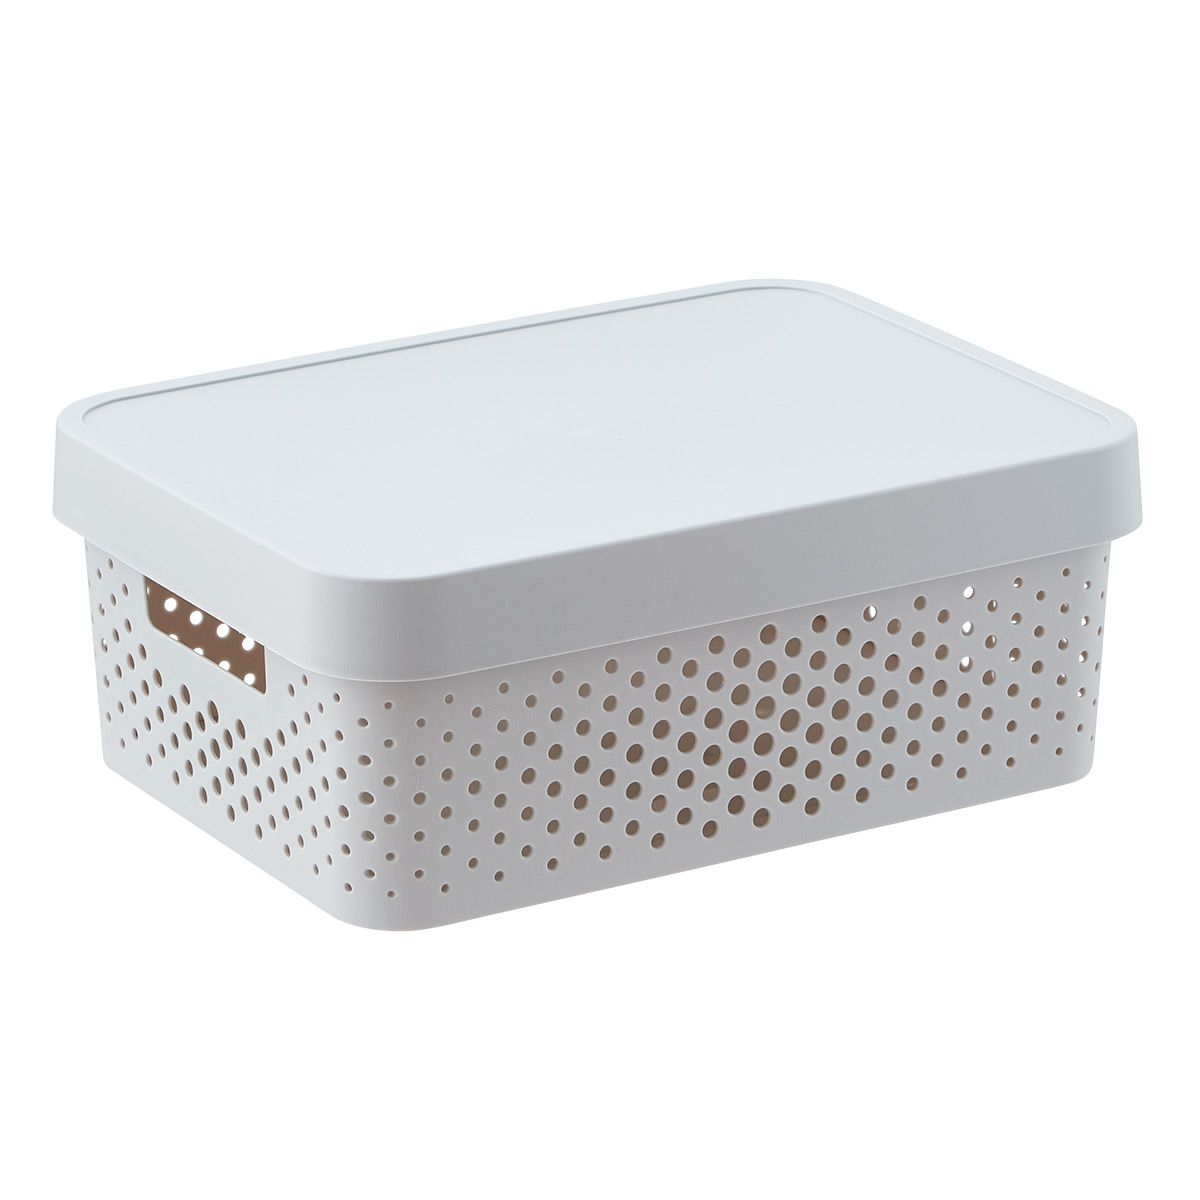 Curver  Infinity Plastic Storage Boxes with Lids | The Container Store